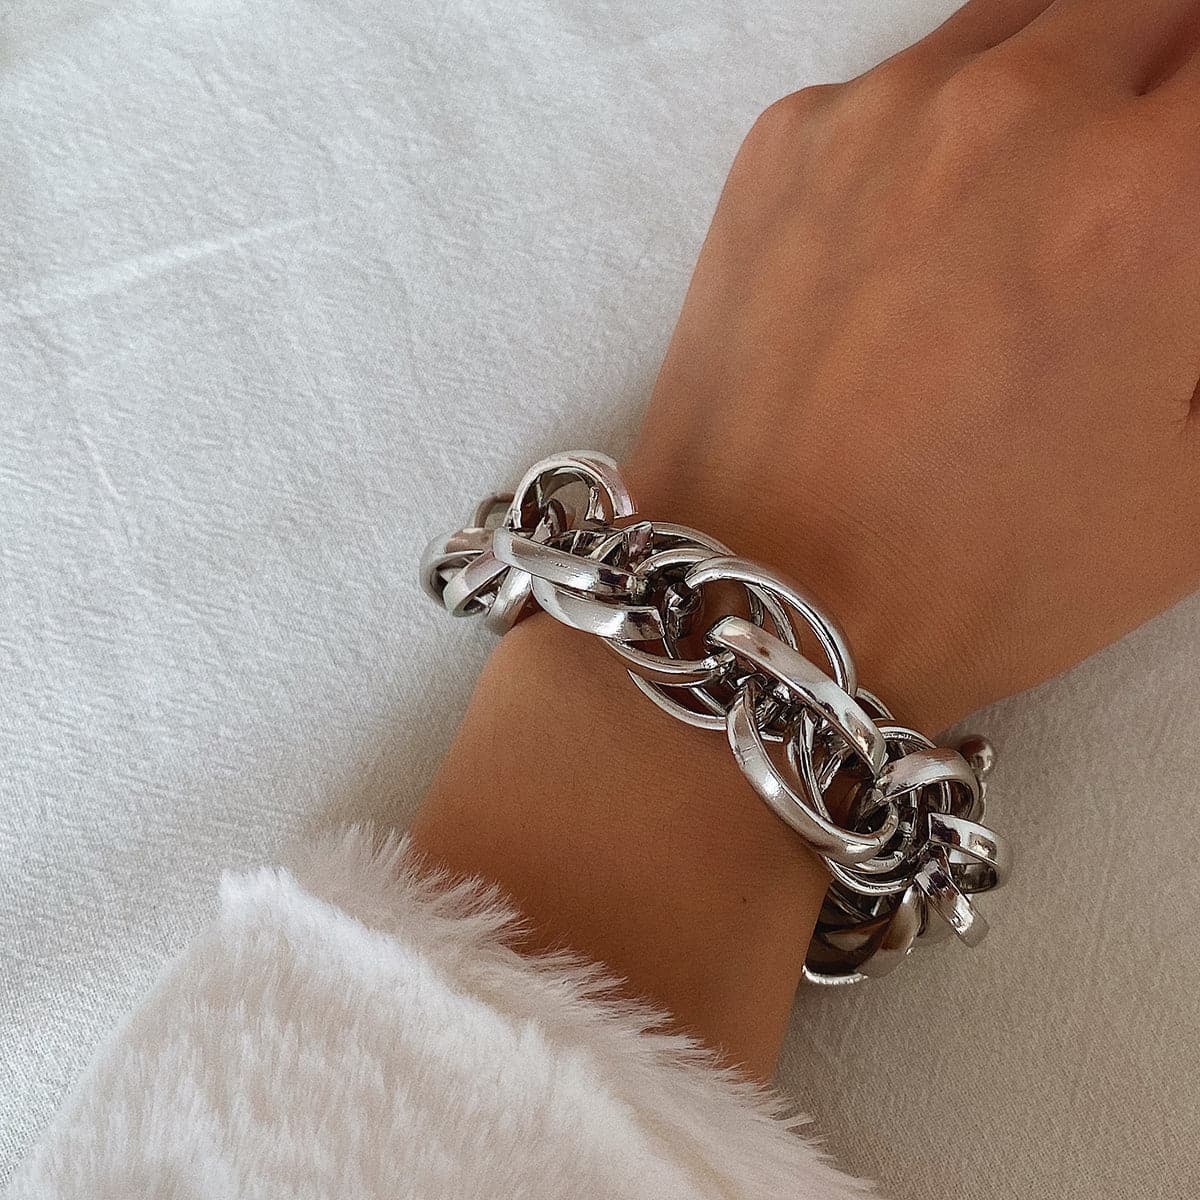 Silver-Plated Overlapping Chain Link Bracelet